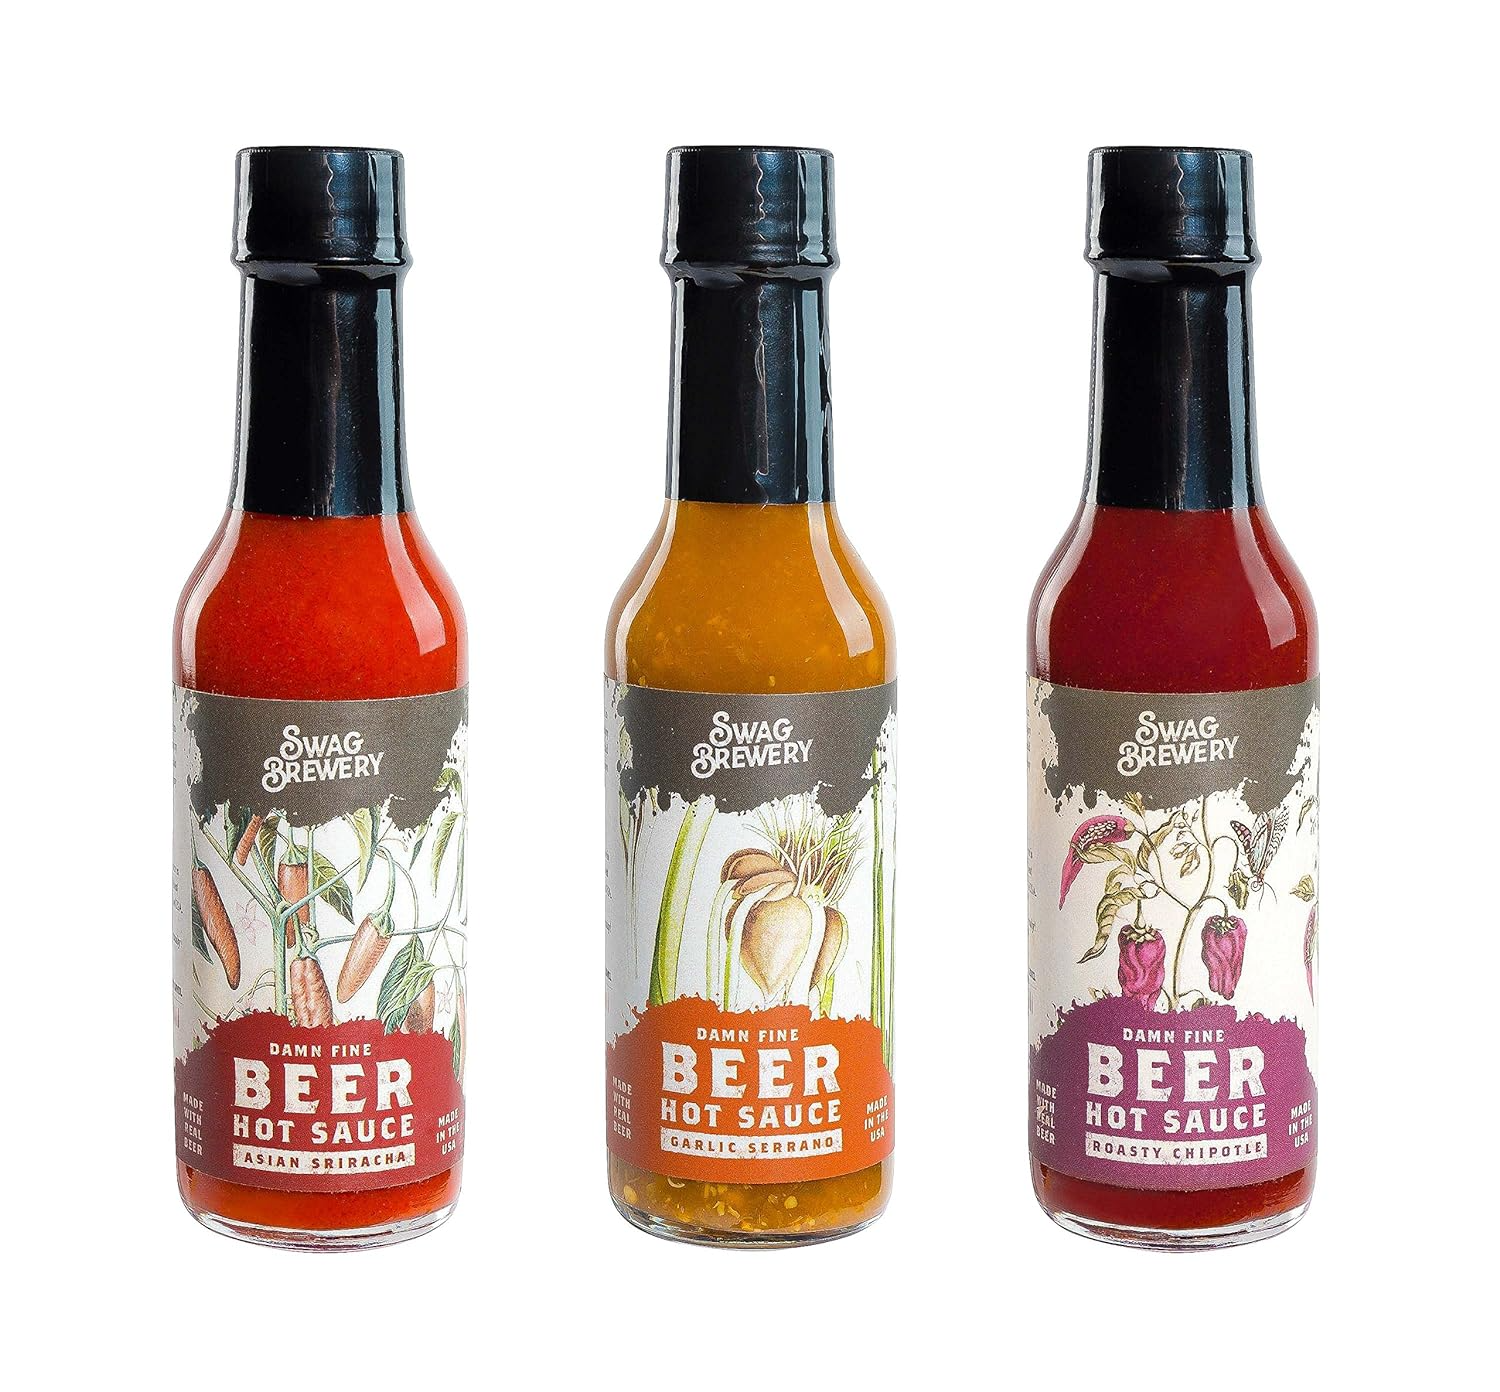 Beer-infused Hot Sauce Variety 3-pack (Includes Asian Sriracha, Garlic Serrano, & Roasty Chipotle) - Craft Beer Gift, Hot Sauce Gift Set, Beer Sauce, BBQ Sauce, Beer Lover, Grill + Man Cave - Barbecue Whizz...Watch My Smoke!